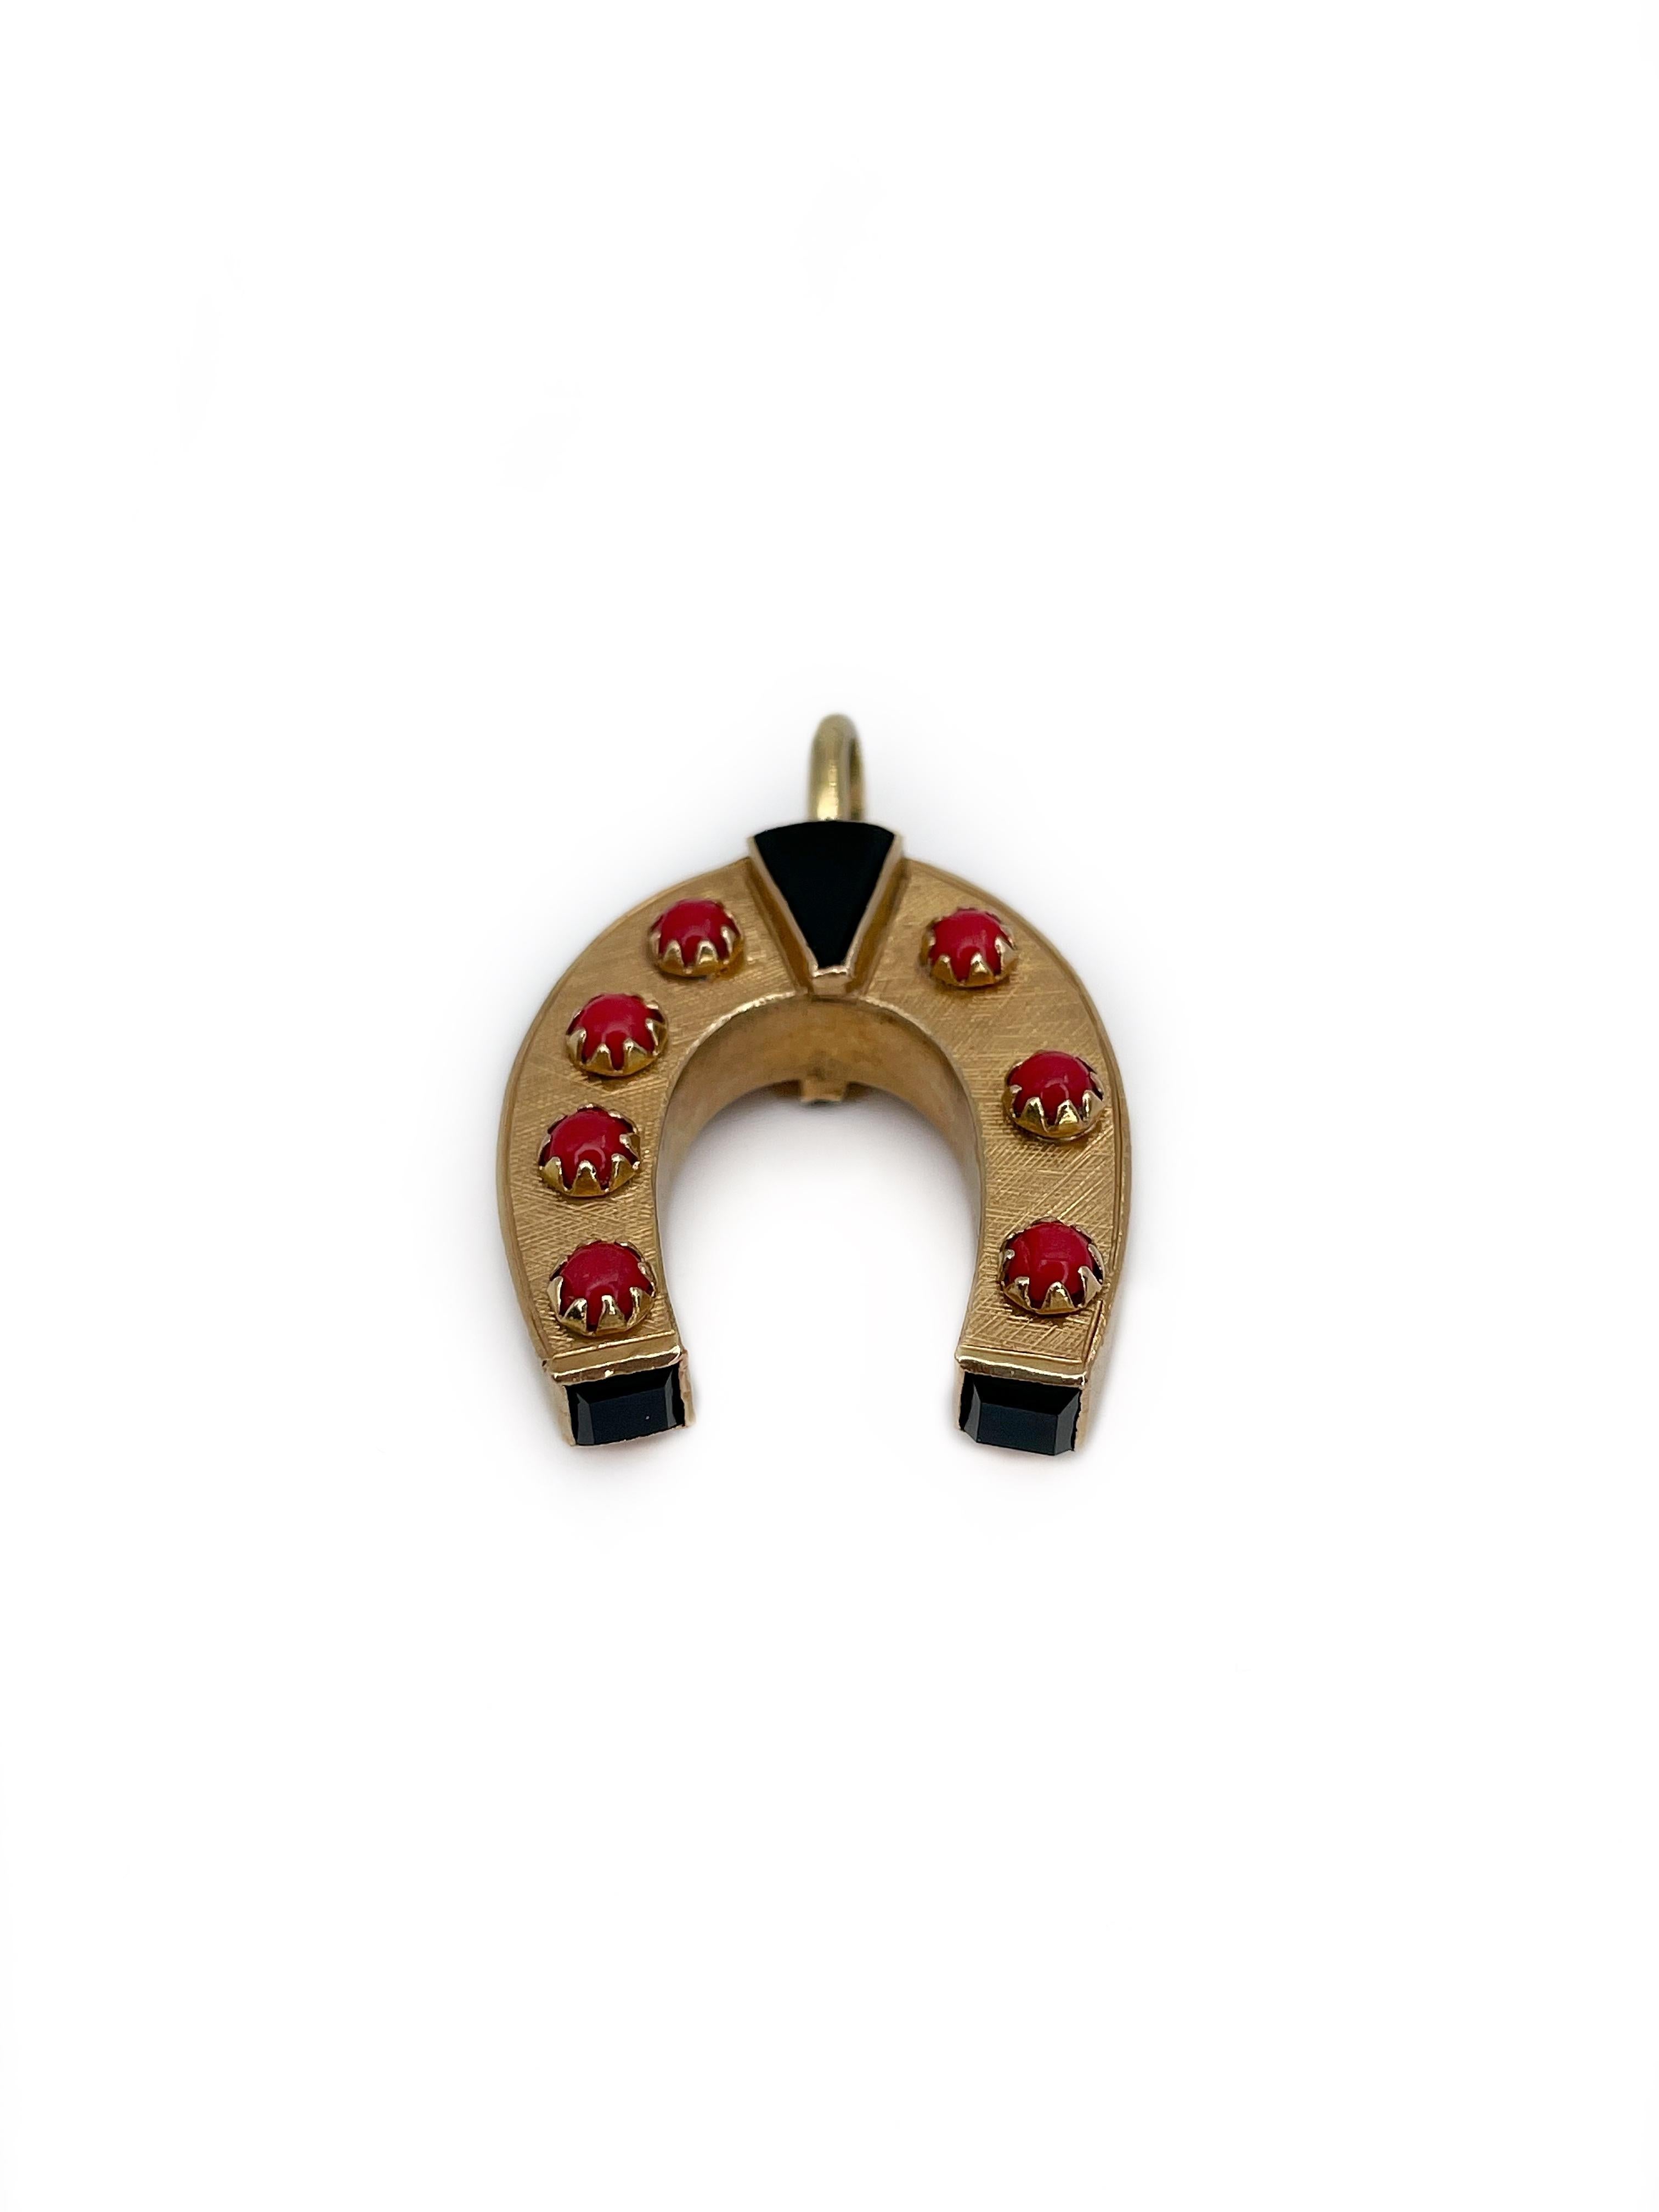 This is a beautiful Victorian horseshoe charm pendant crafted in 14K yellow gold. It features 14 red corals and is adorned with black onyx.

Weight: 6.93g
Size: 3.5x2.5cm

———

If you have any questions, please feel free to ask. We describe our